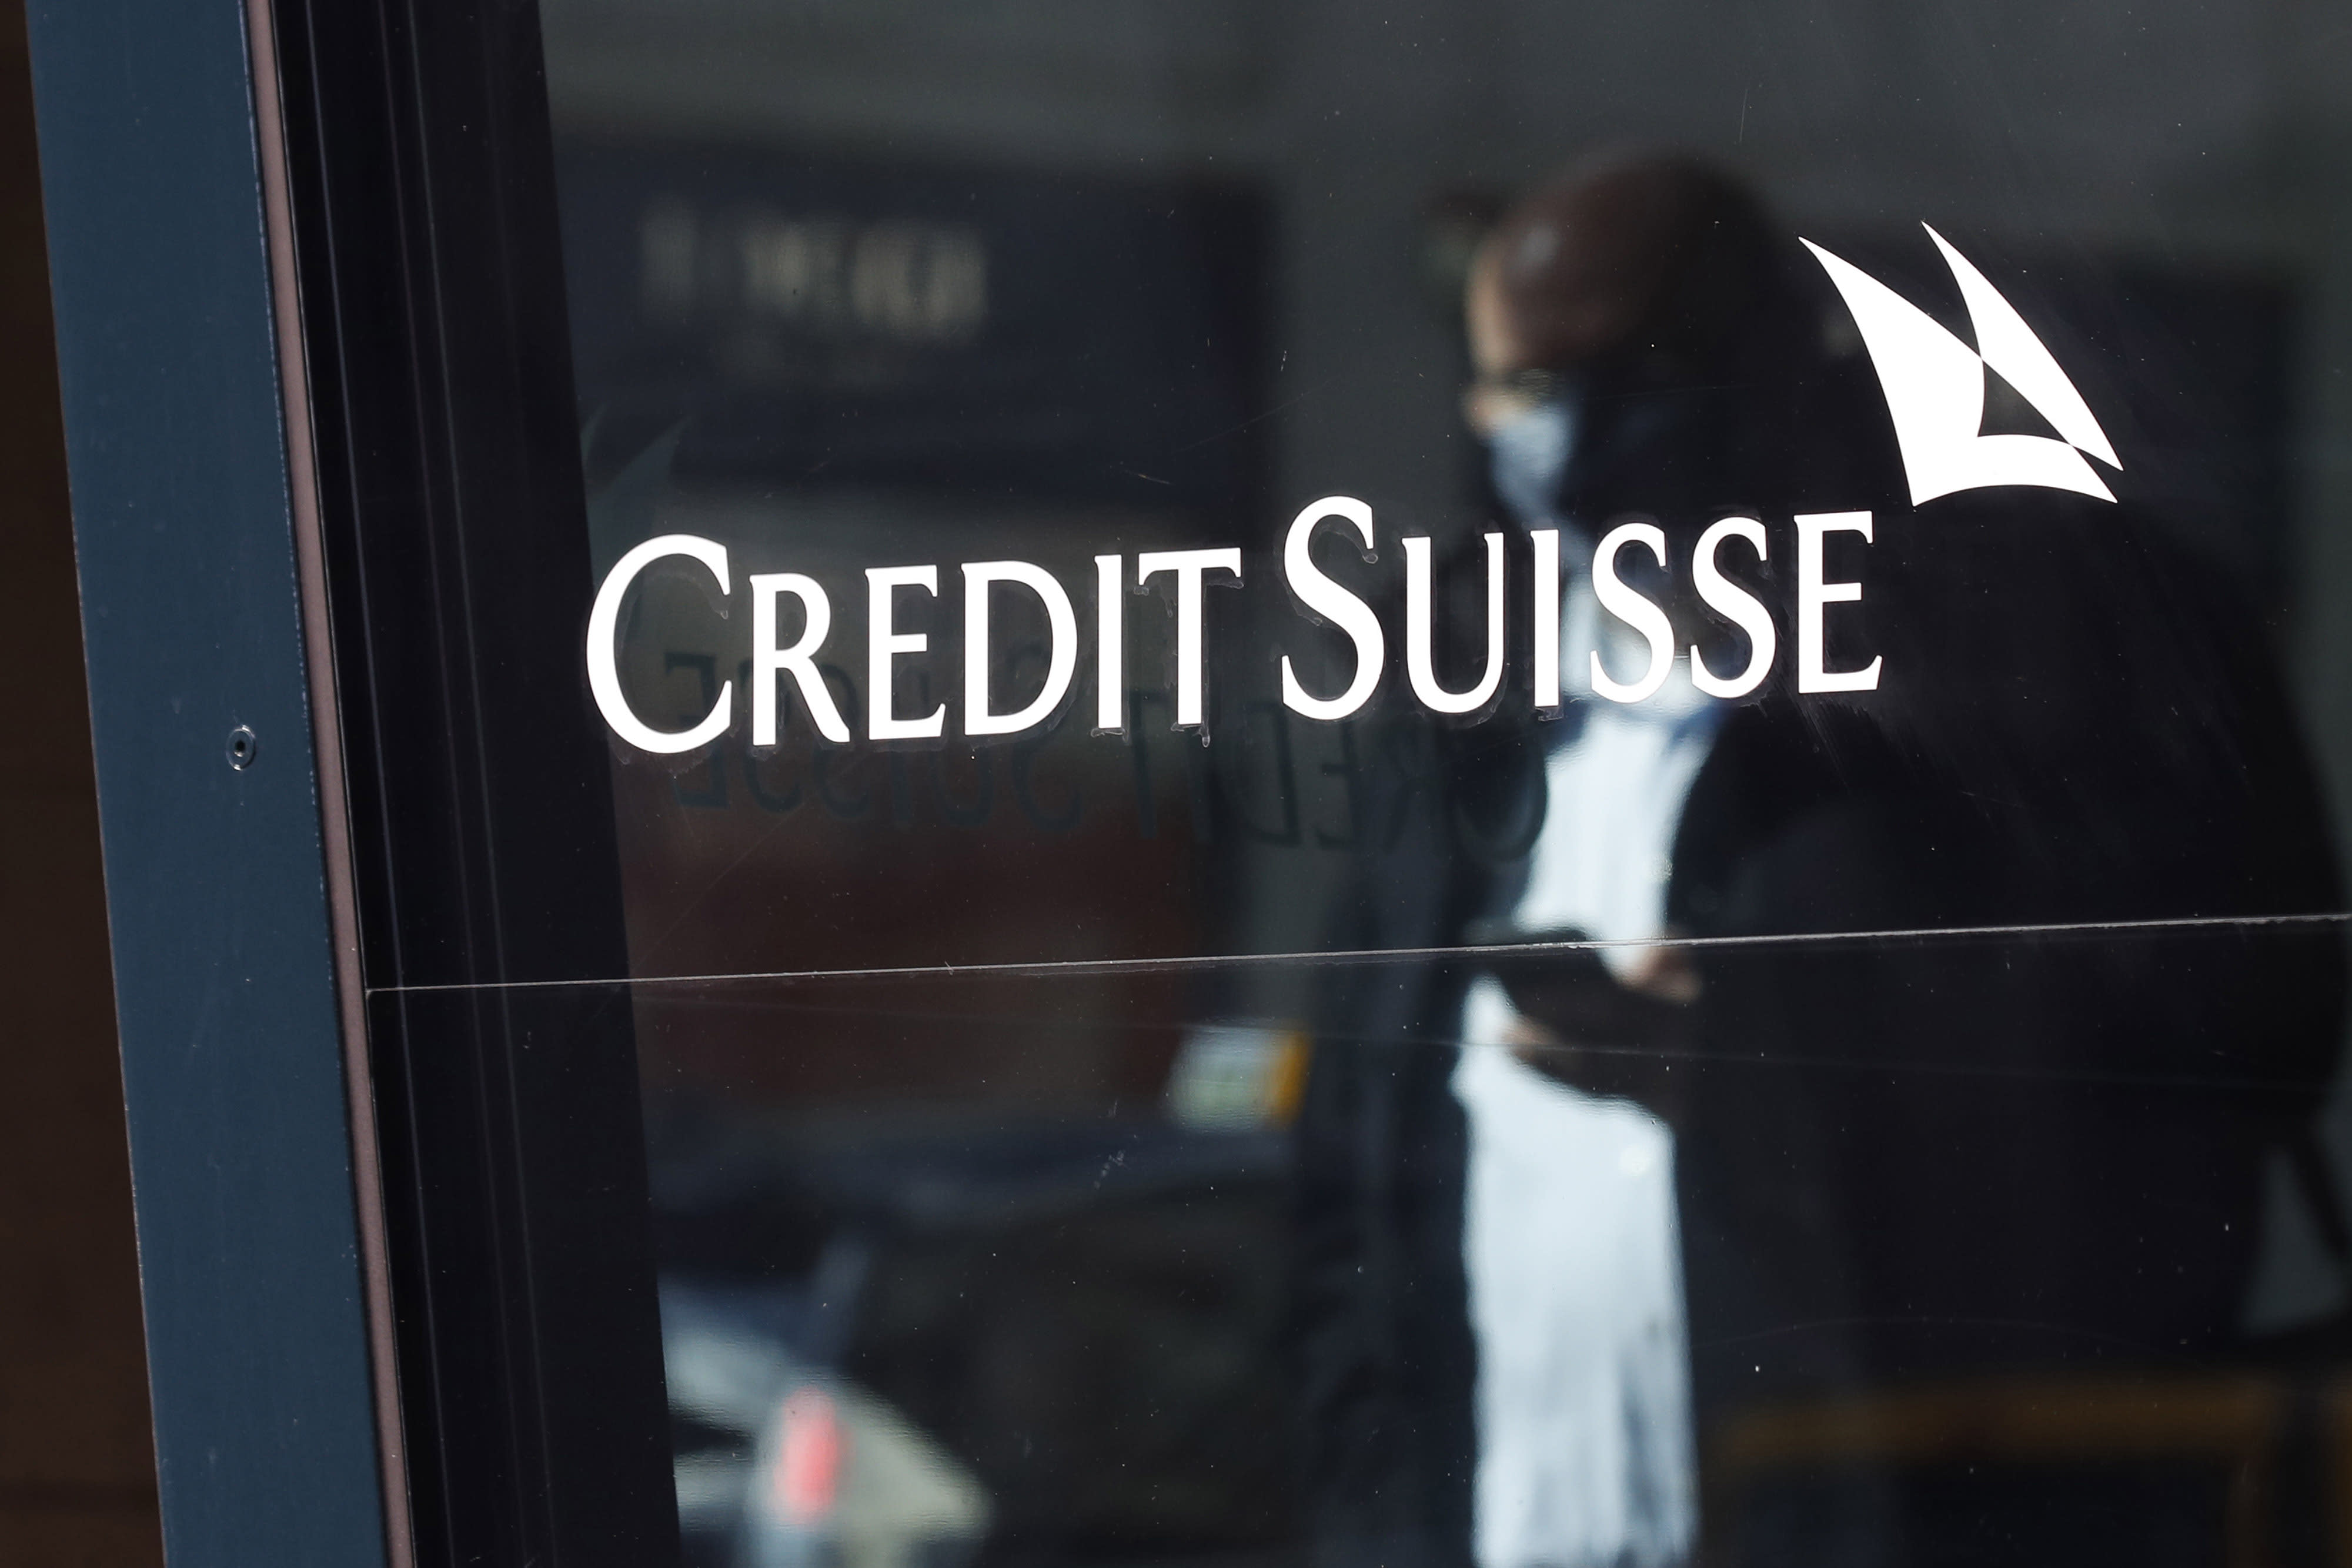 Credit Suisse has 7 new ‘best-in-class’ stock picks to round off the year